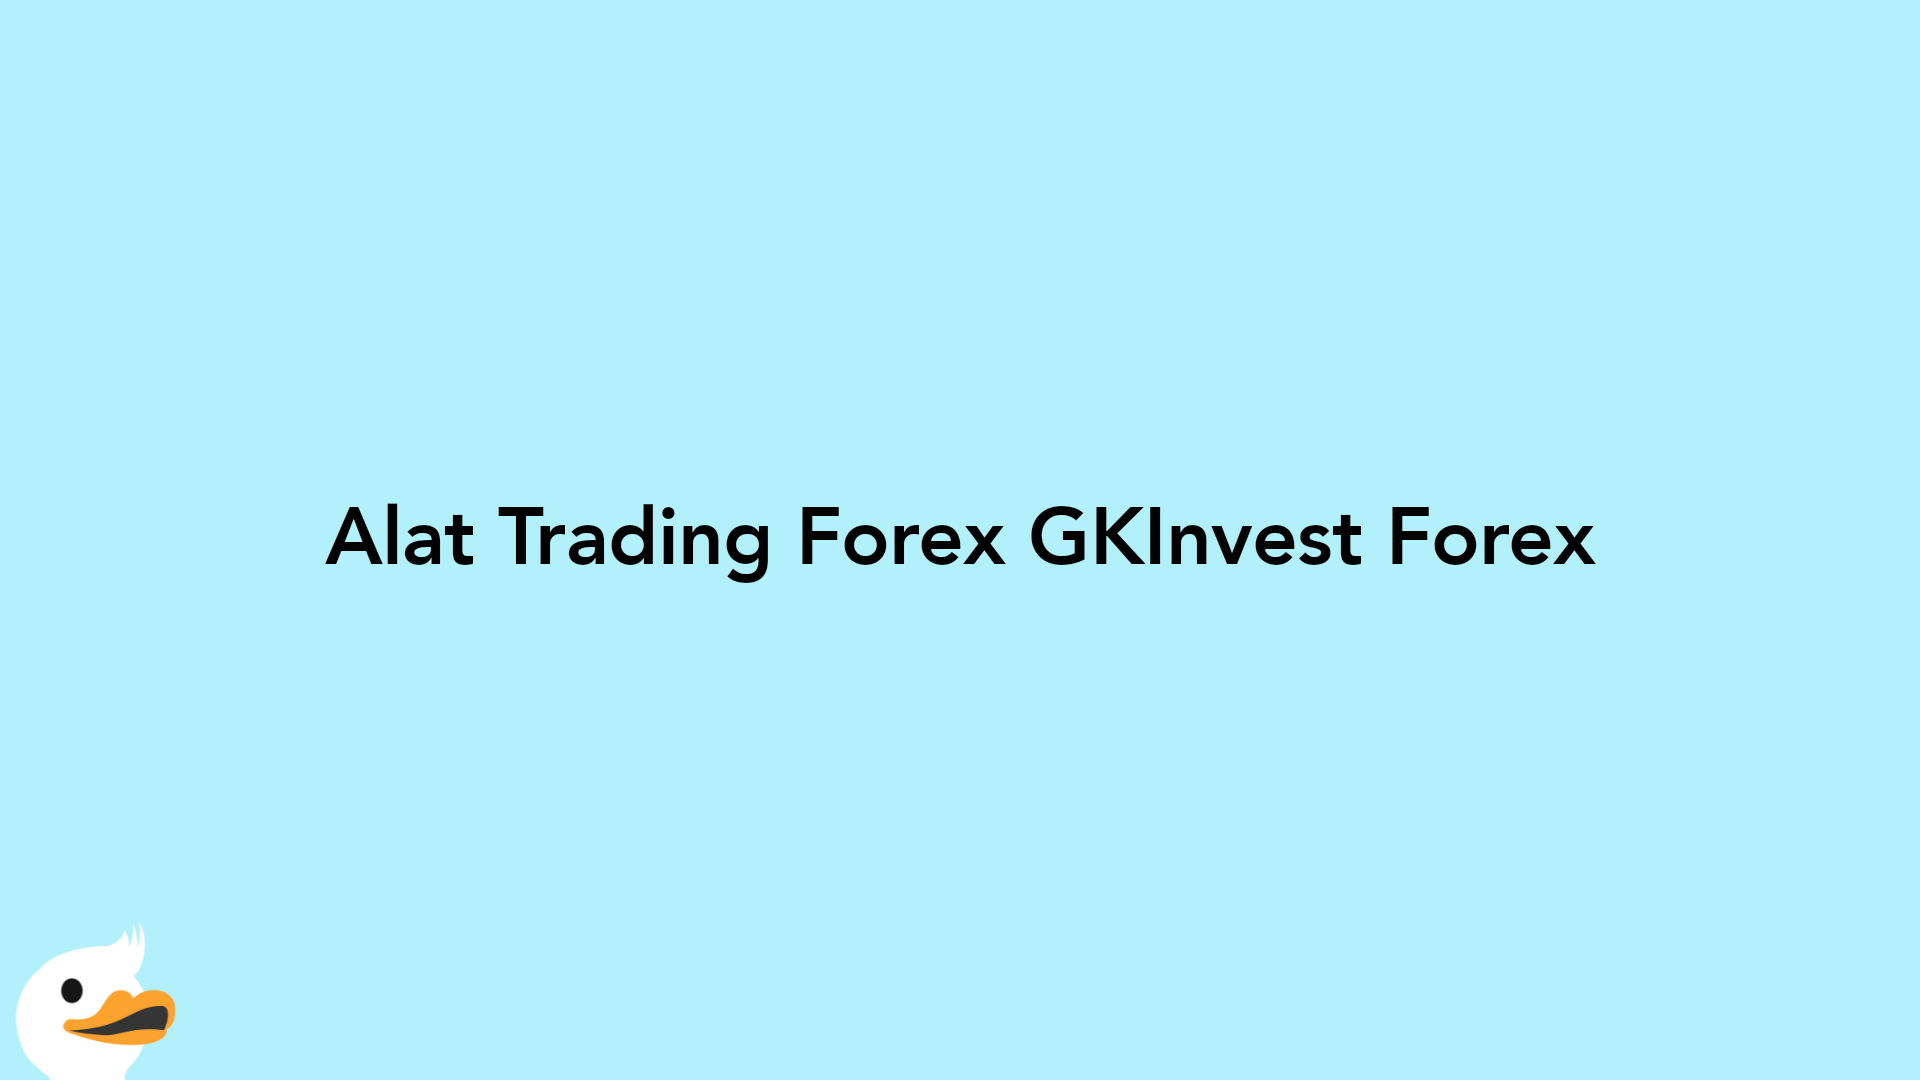 Alat Trading Forex GKInvest Forex